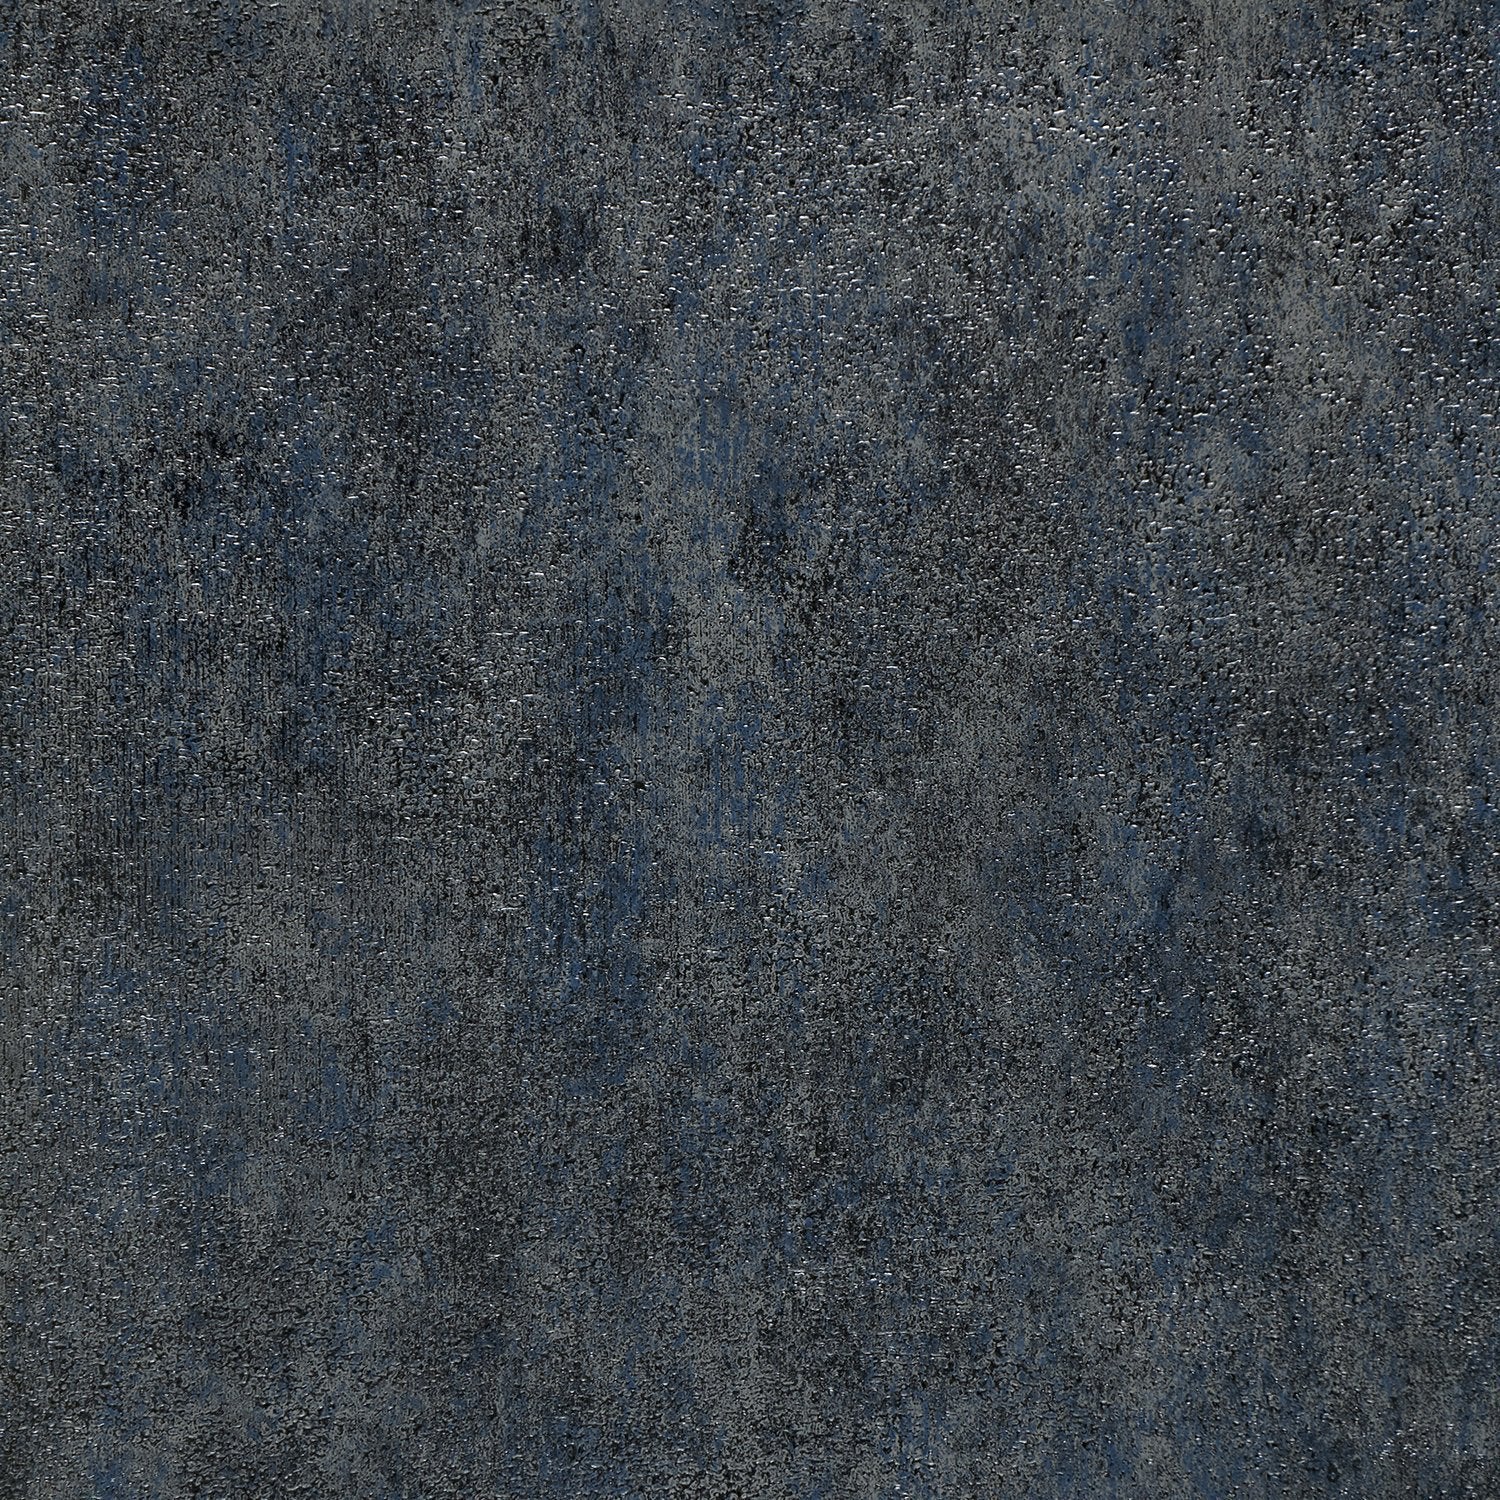 Patina Stone - Y47483 - Wallcovering - Vycon - Kube Contract